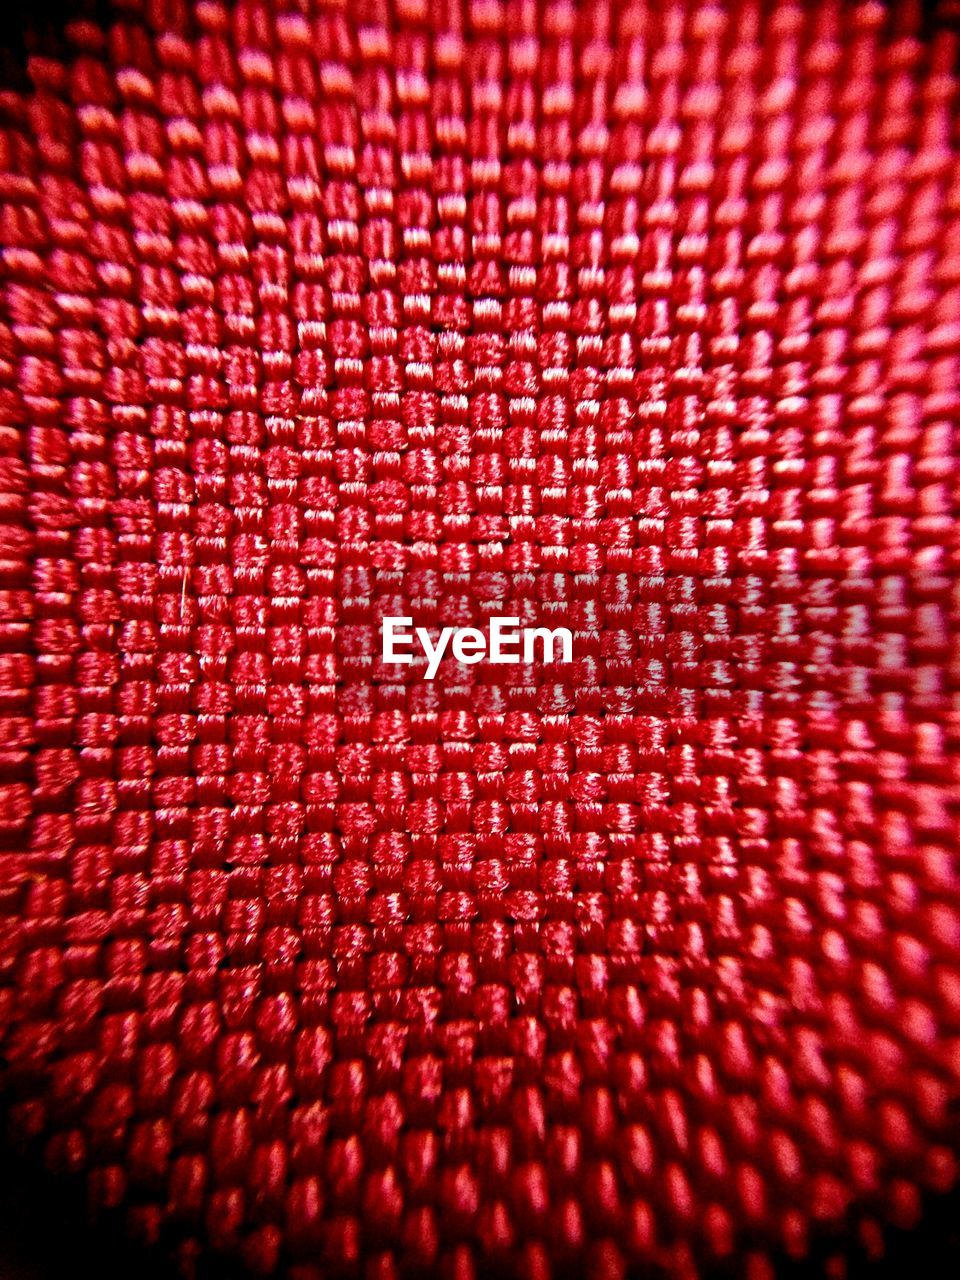 FULL FRAME SHOT OF ABSTRACT PATTERN ON RED FABRIC